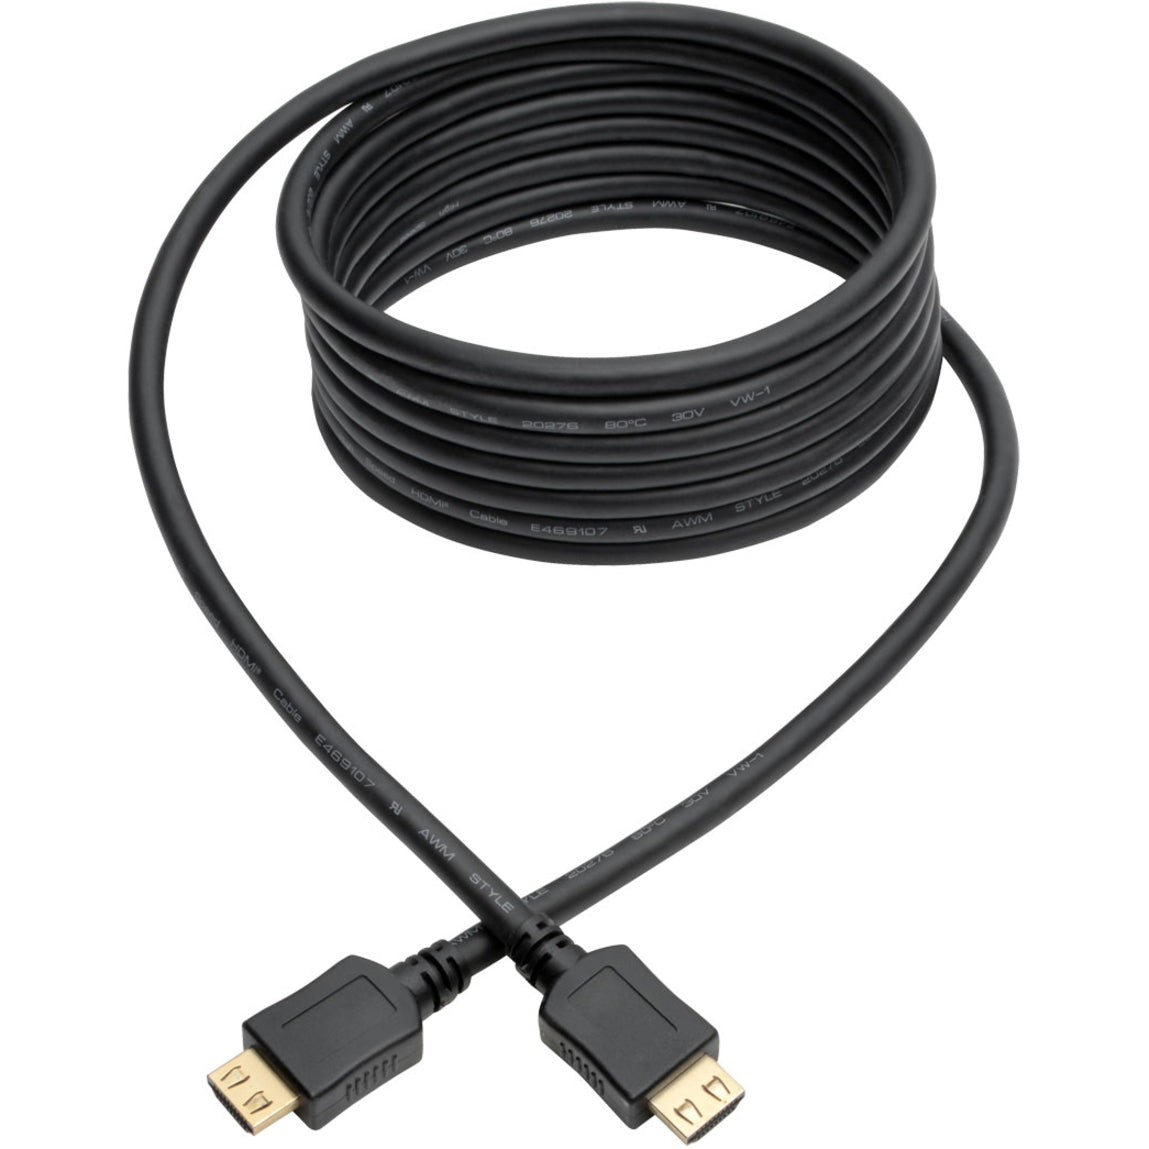 Tripp Lite P568-012-BK-GRP High-Speed HDMI Cable, 12 ft., with Gripping Connectors, 4K, Black